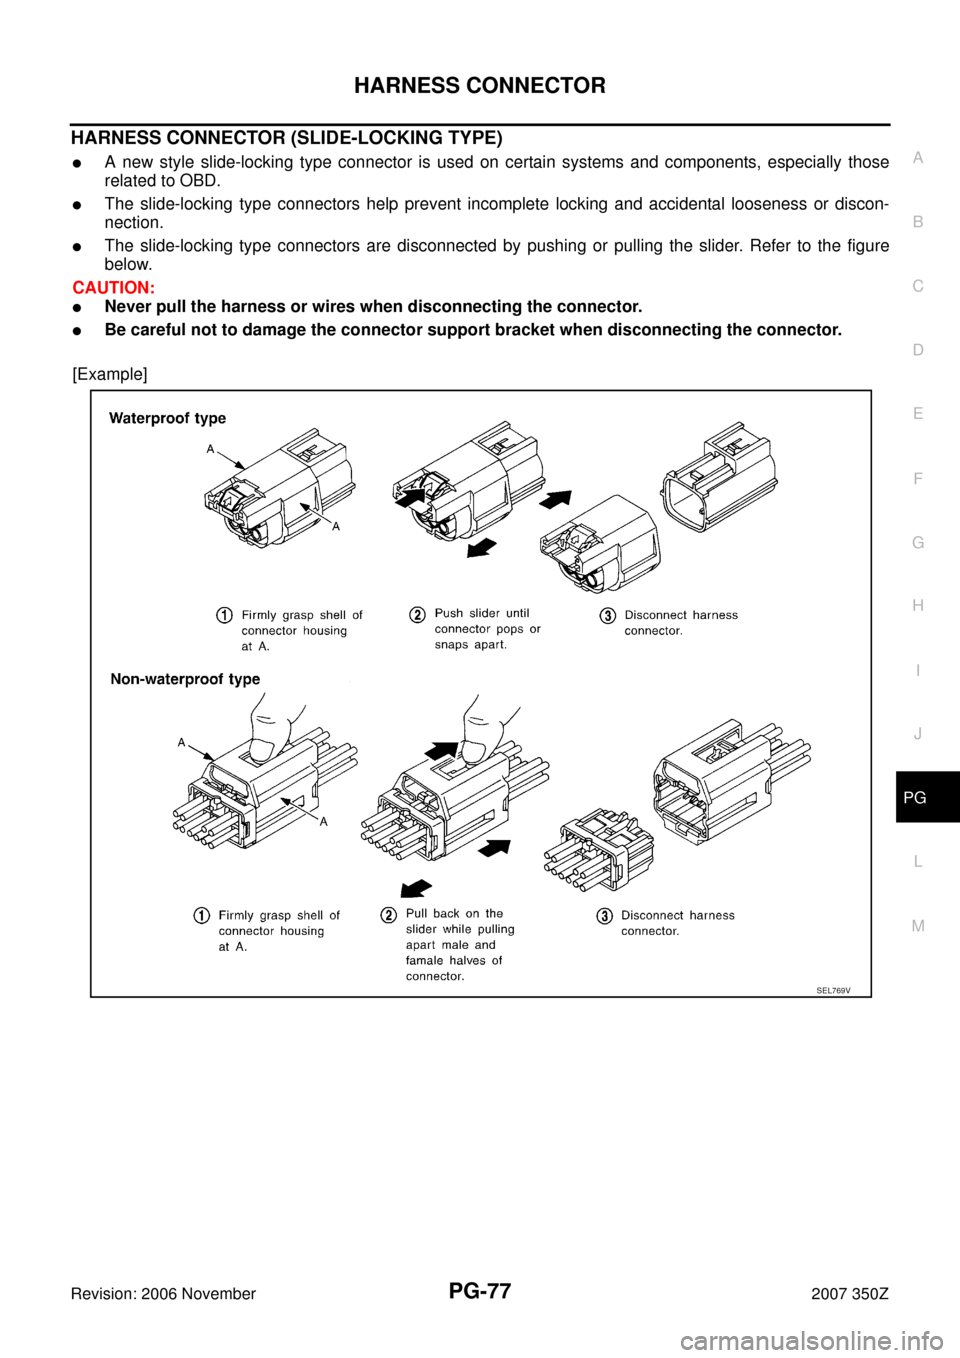 NISSAN 350Z 2007 Z33 Power Supply, Ground And Circuit Manual PDF HARNESS CONNECTOR
PG-77
C
D
E
F
G
H
I
J
L
MA
B
PG
Revision: 2006 November2007 350Z
HARNESS CONNECTOR (SLIDE-LOCKING TYPE)
A new style slide-locking type connector is used on certain systems and compo